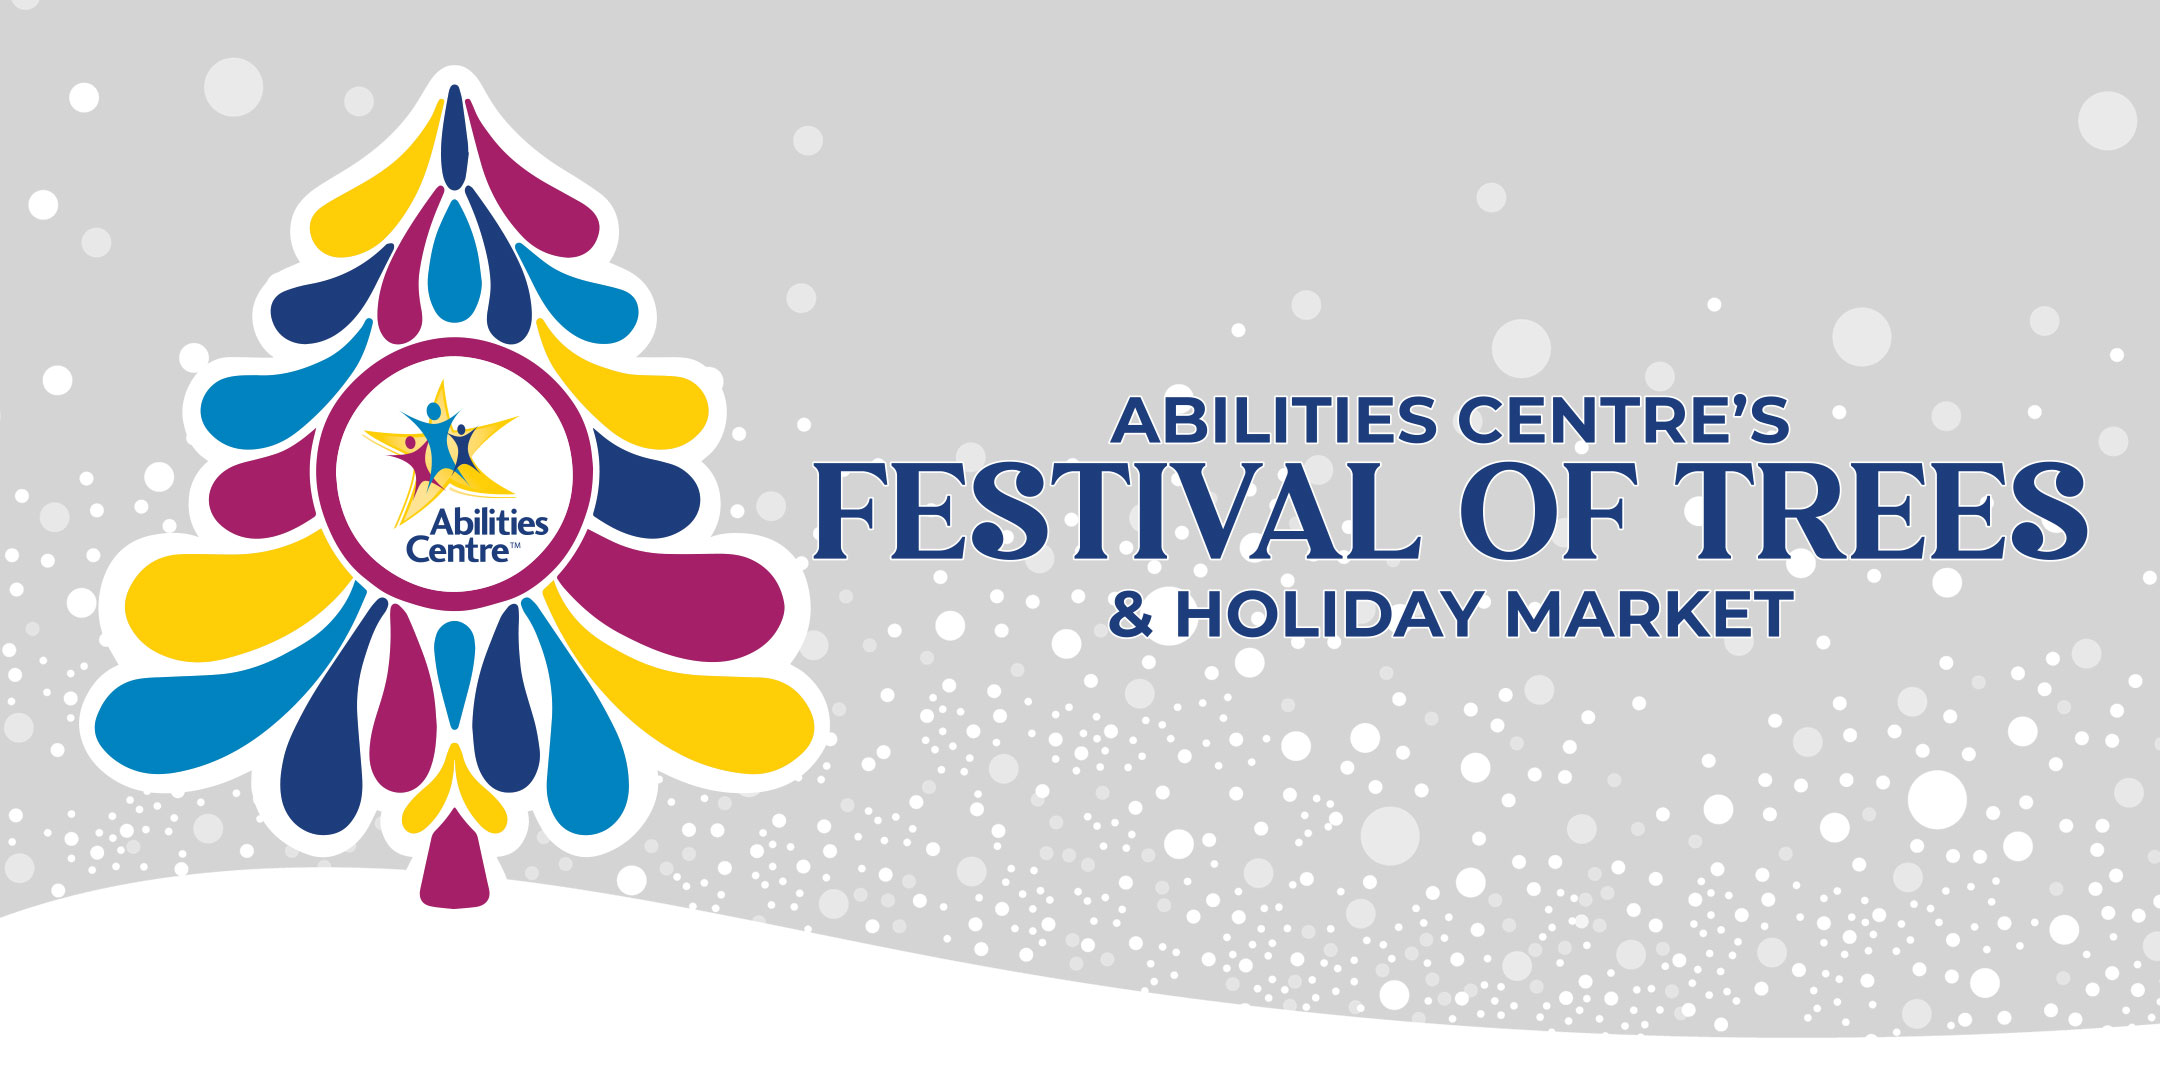 Abilities Centre Festival of Trees and holiday market